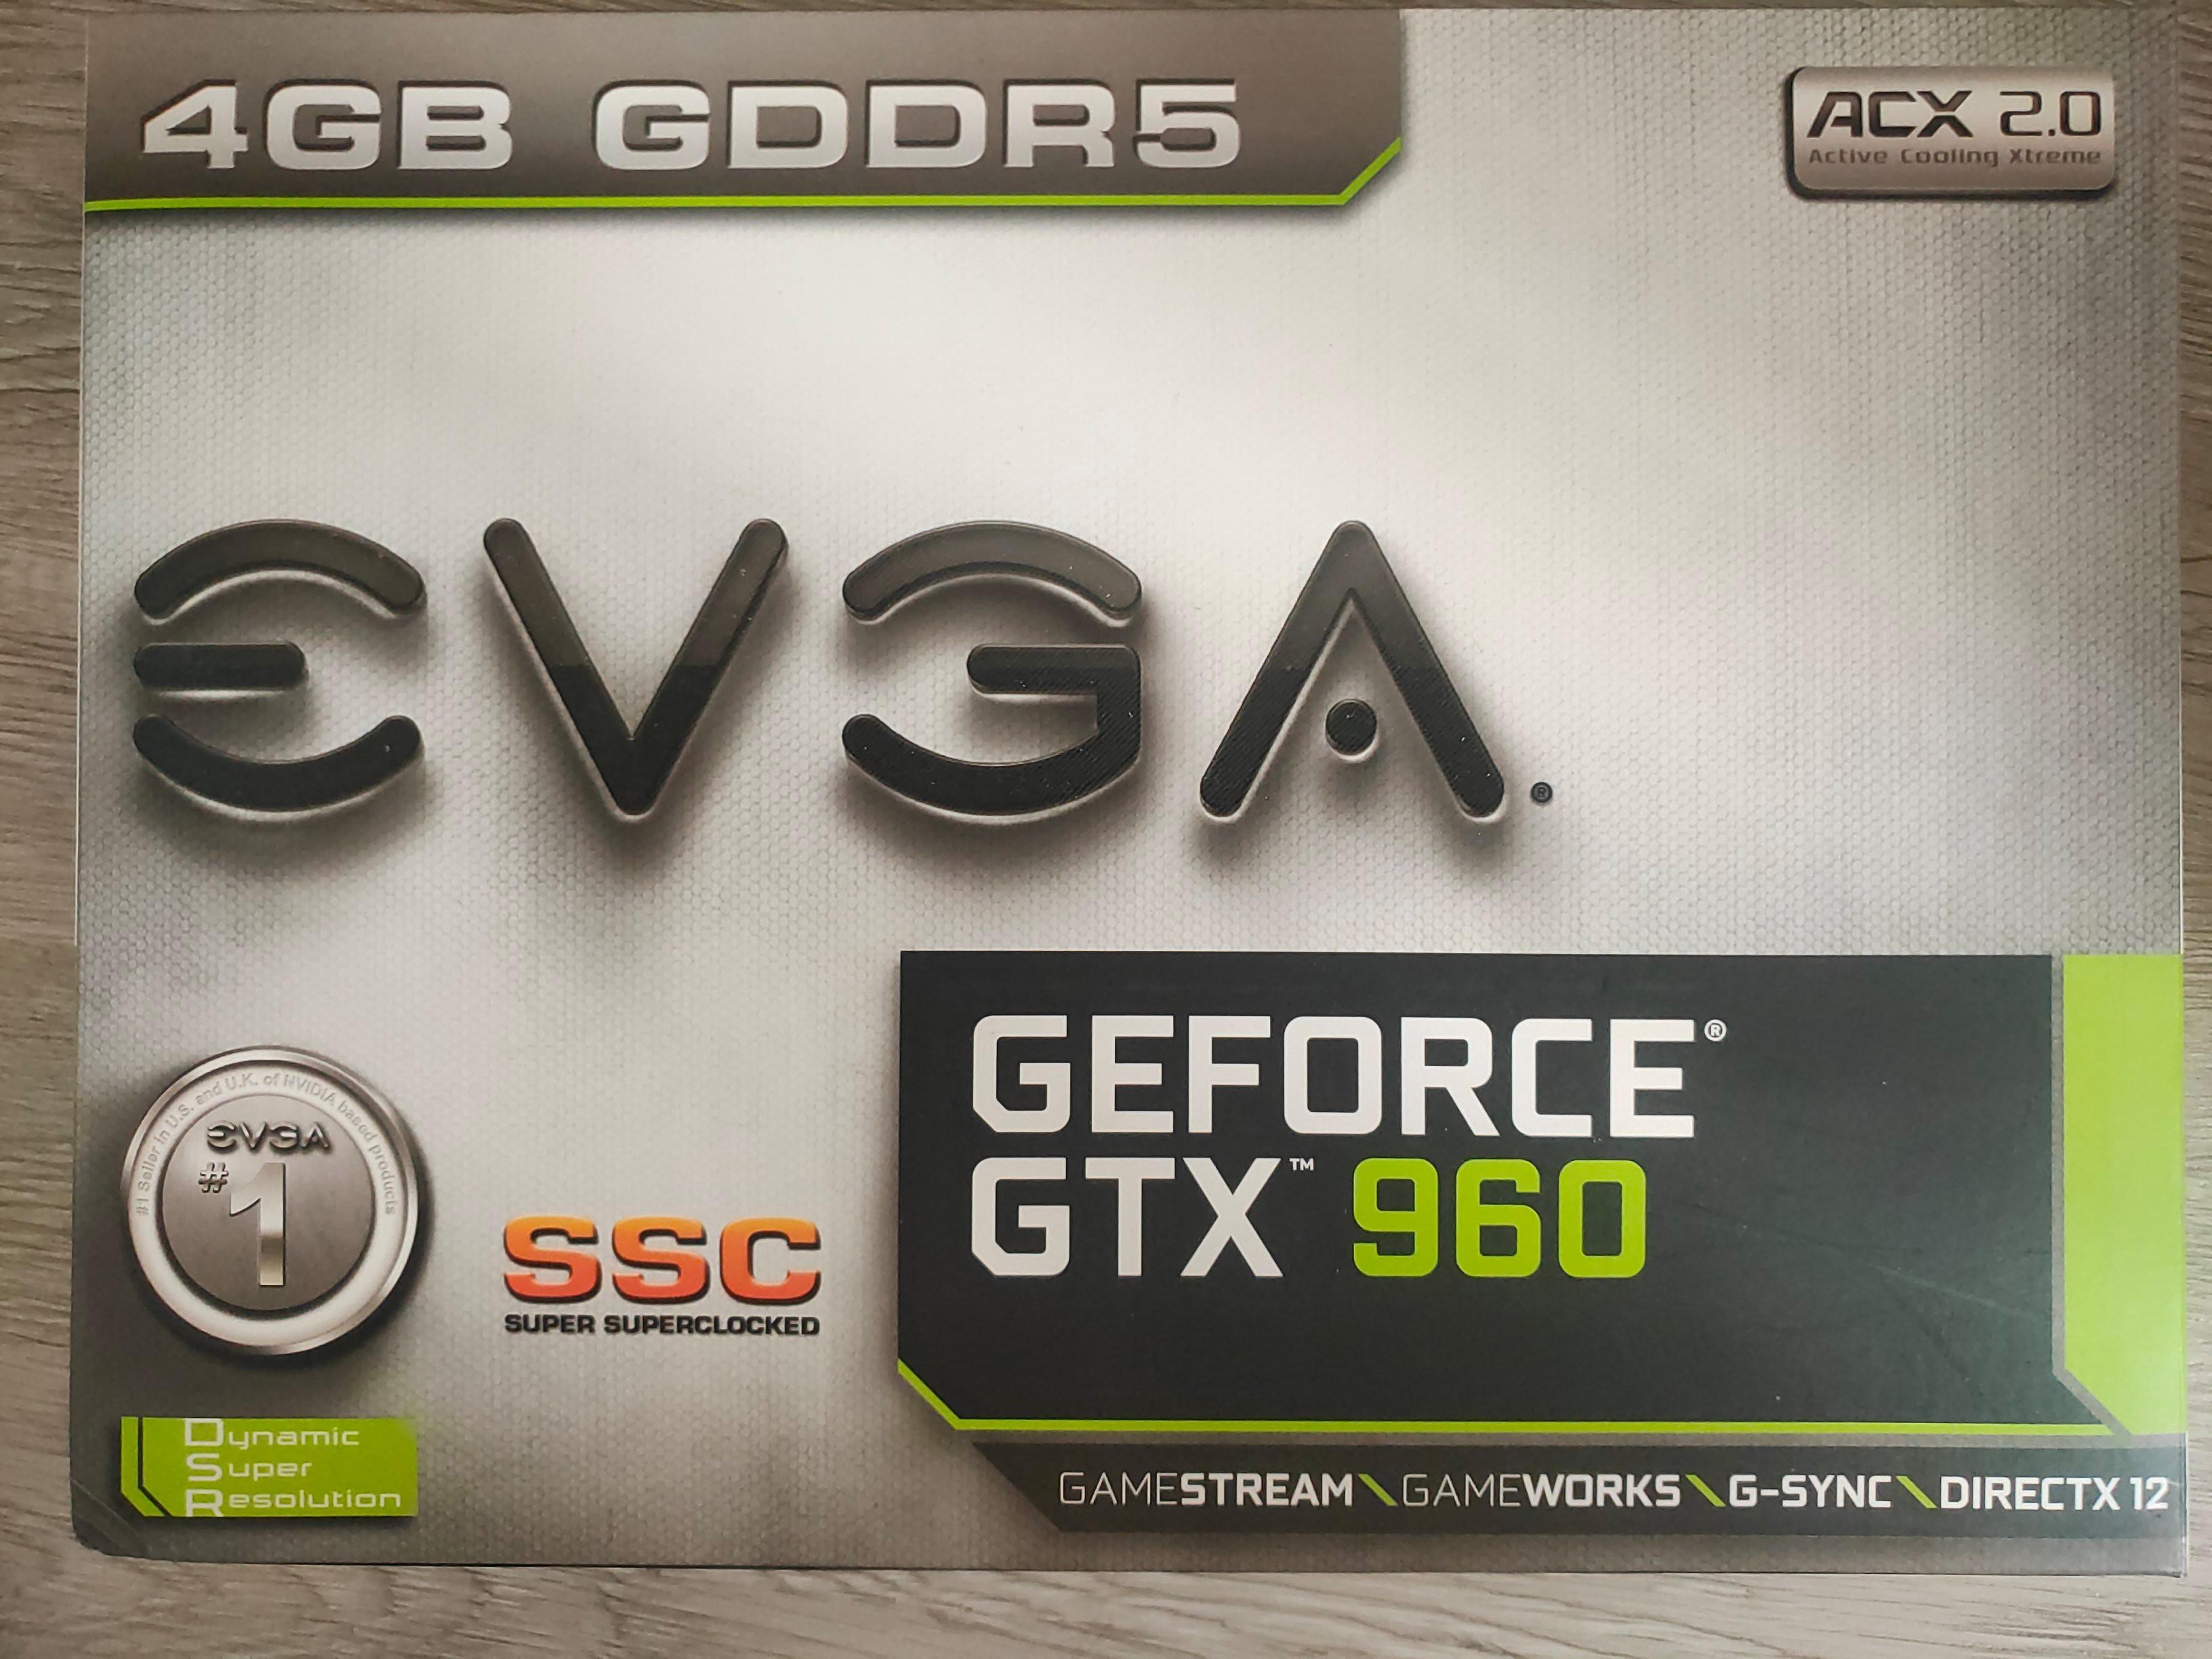 Evga Gtx 960 Ssc 4gb Electronics Computer Parts Accessories On Carousell